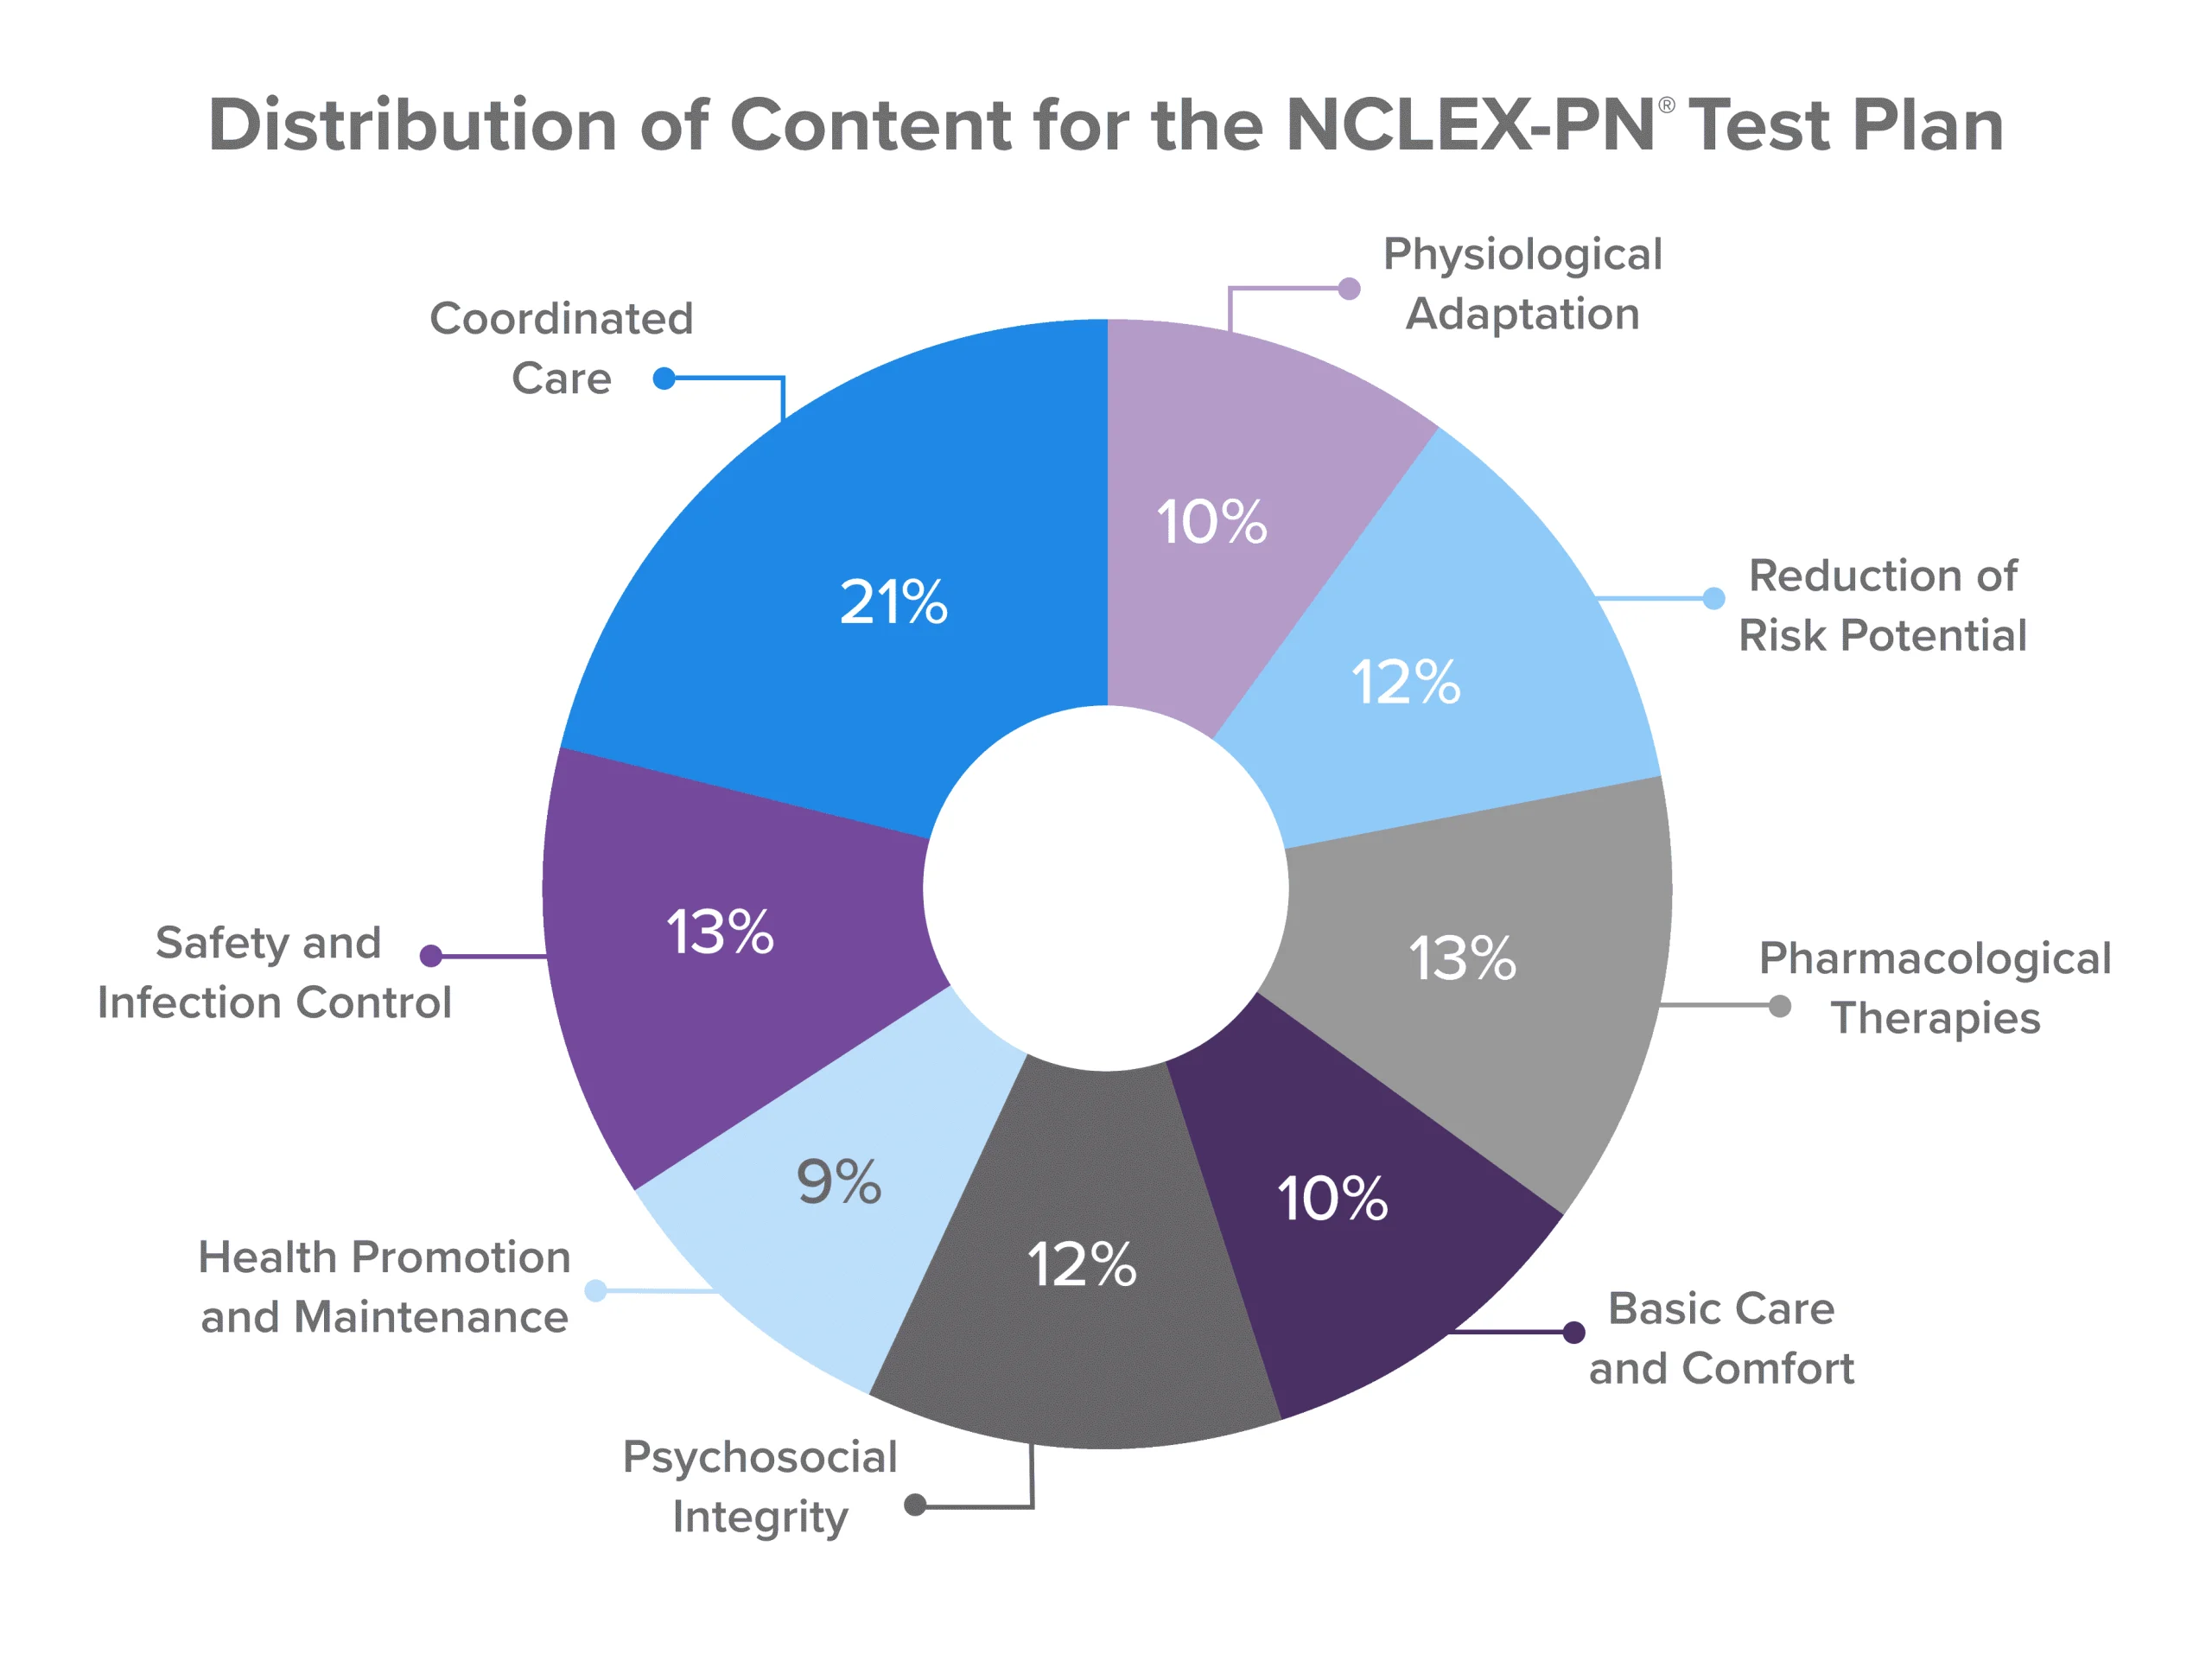 Pie chart of Distribution of Content for the NCLEX-PN Test Plan